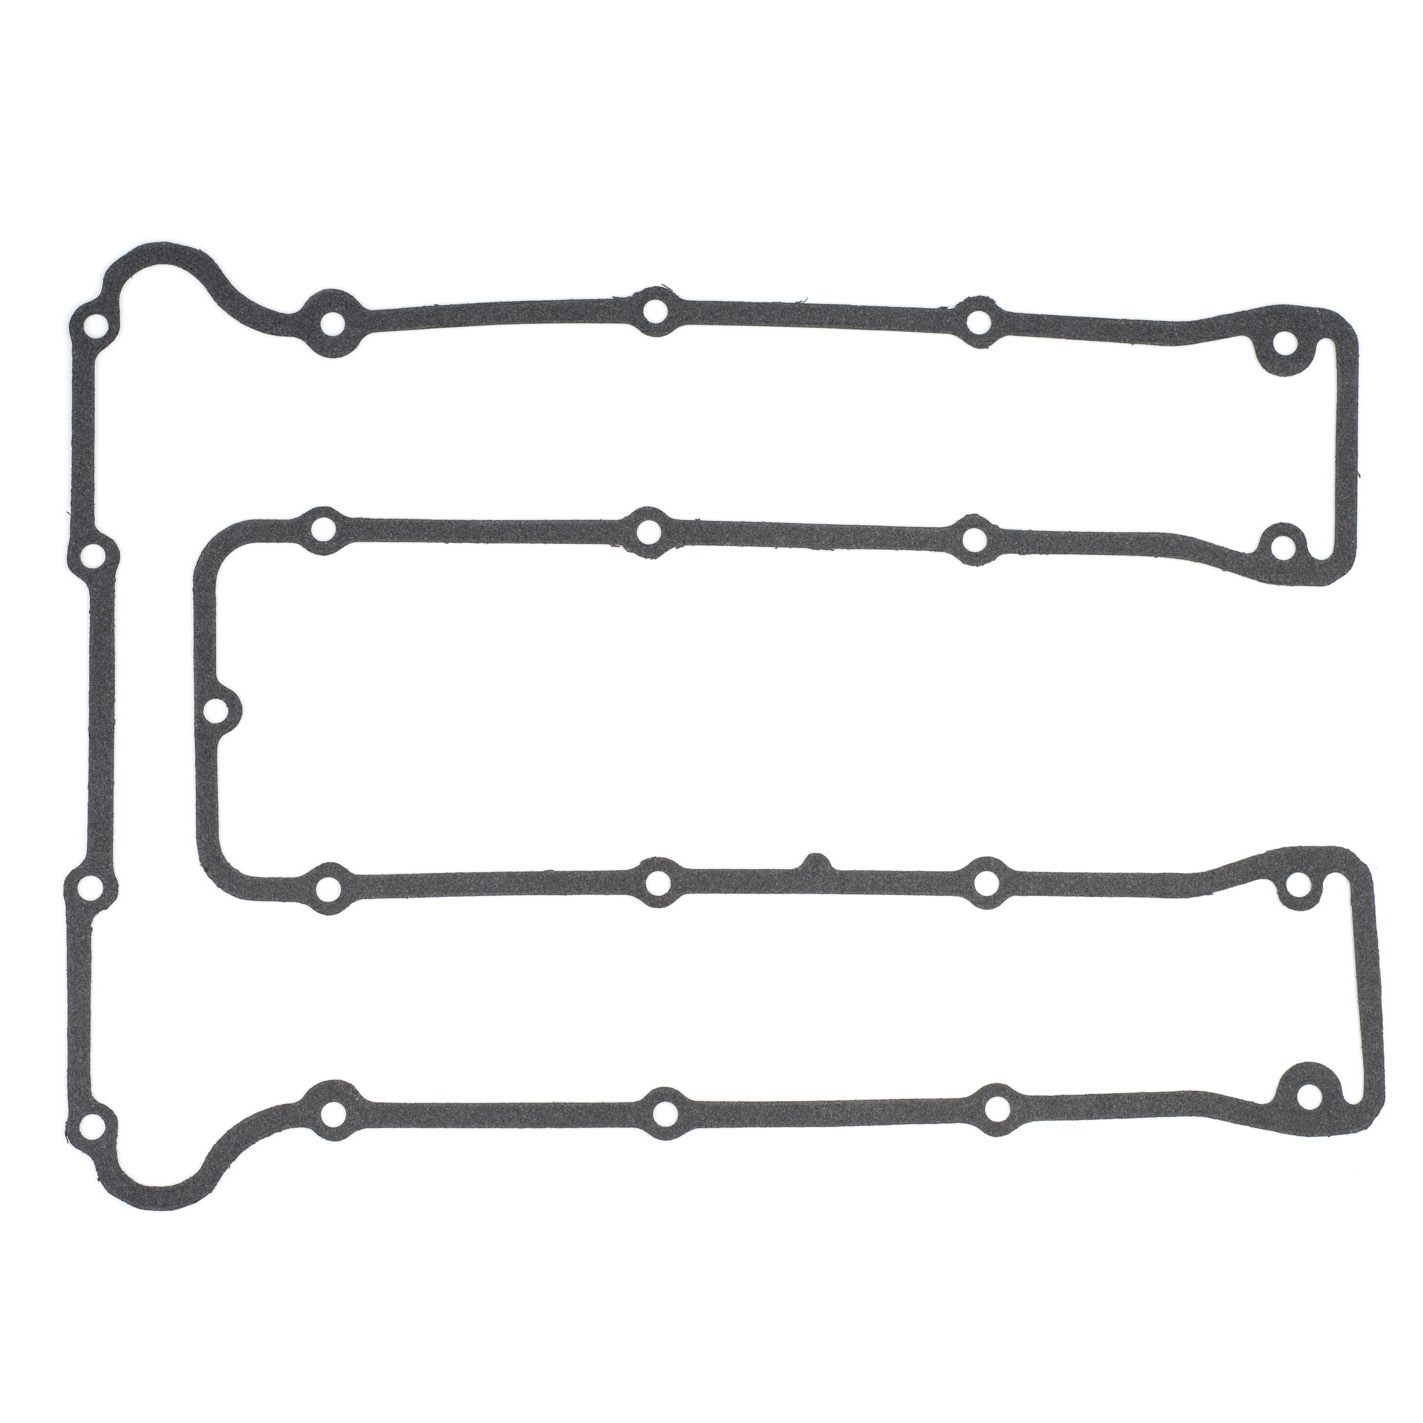 XS750 Valve Cover Gasket